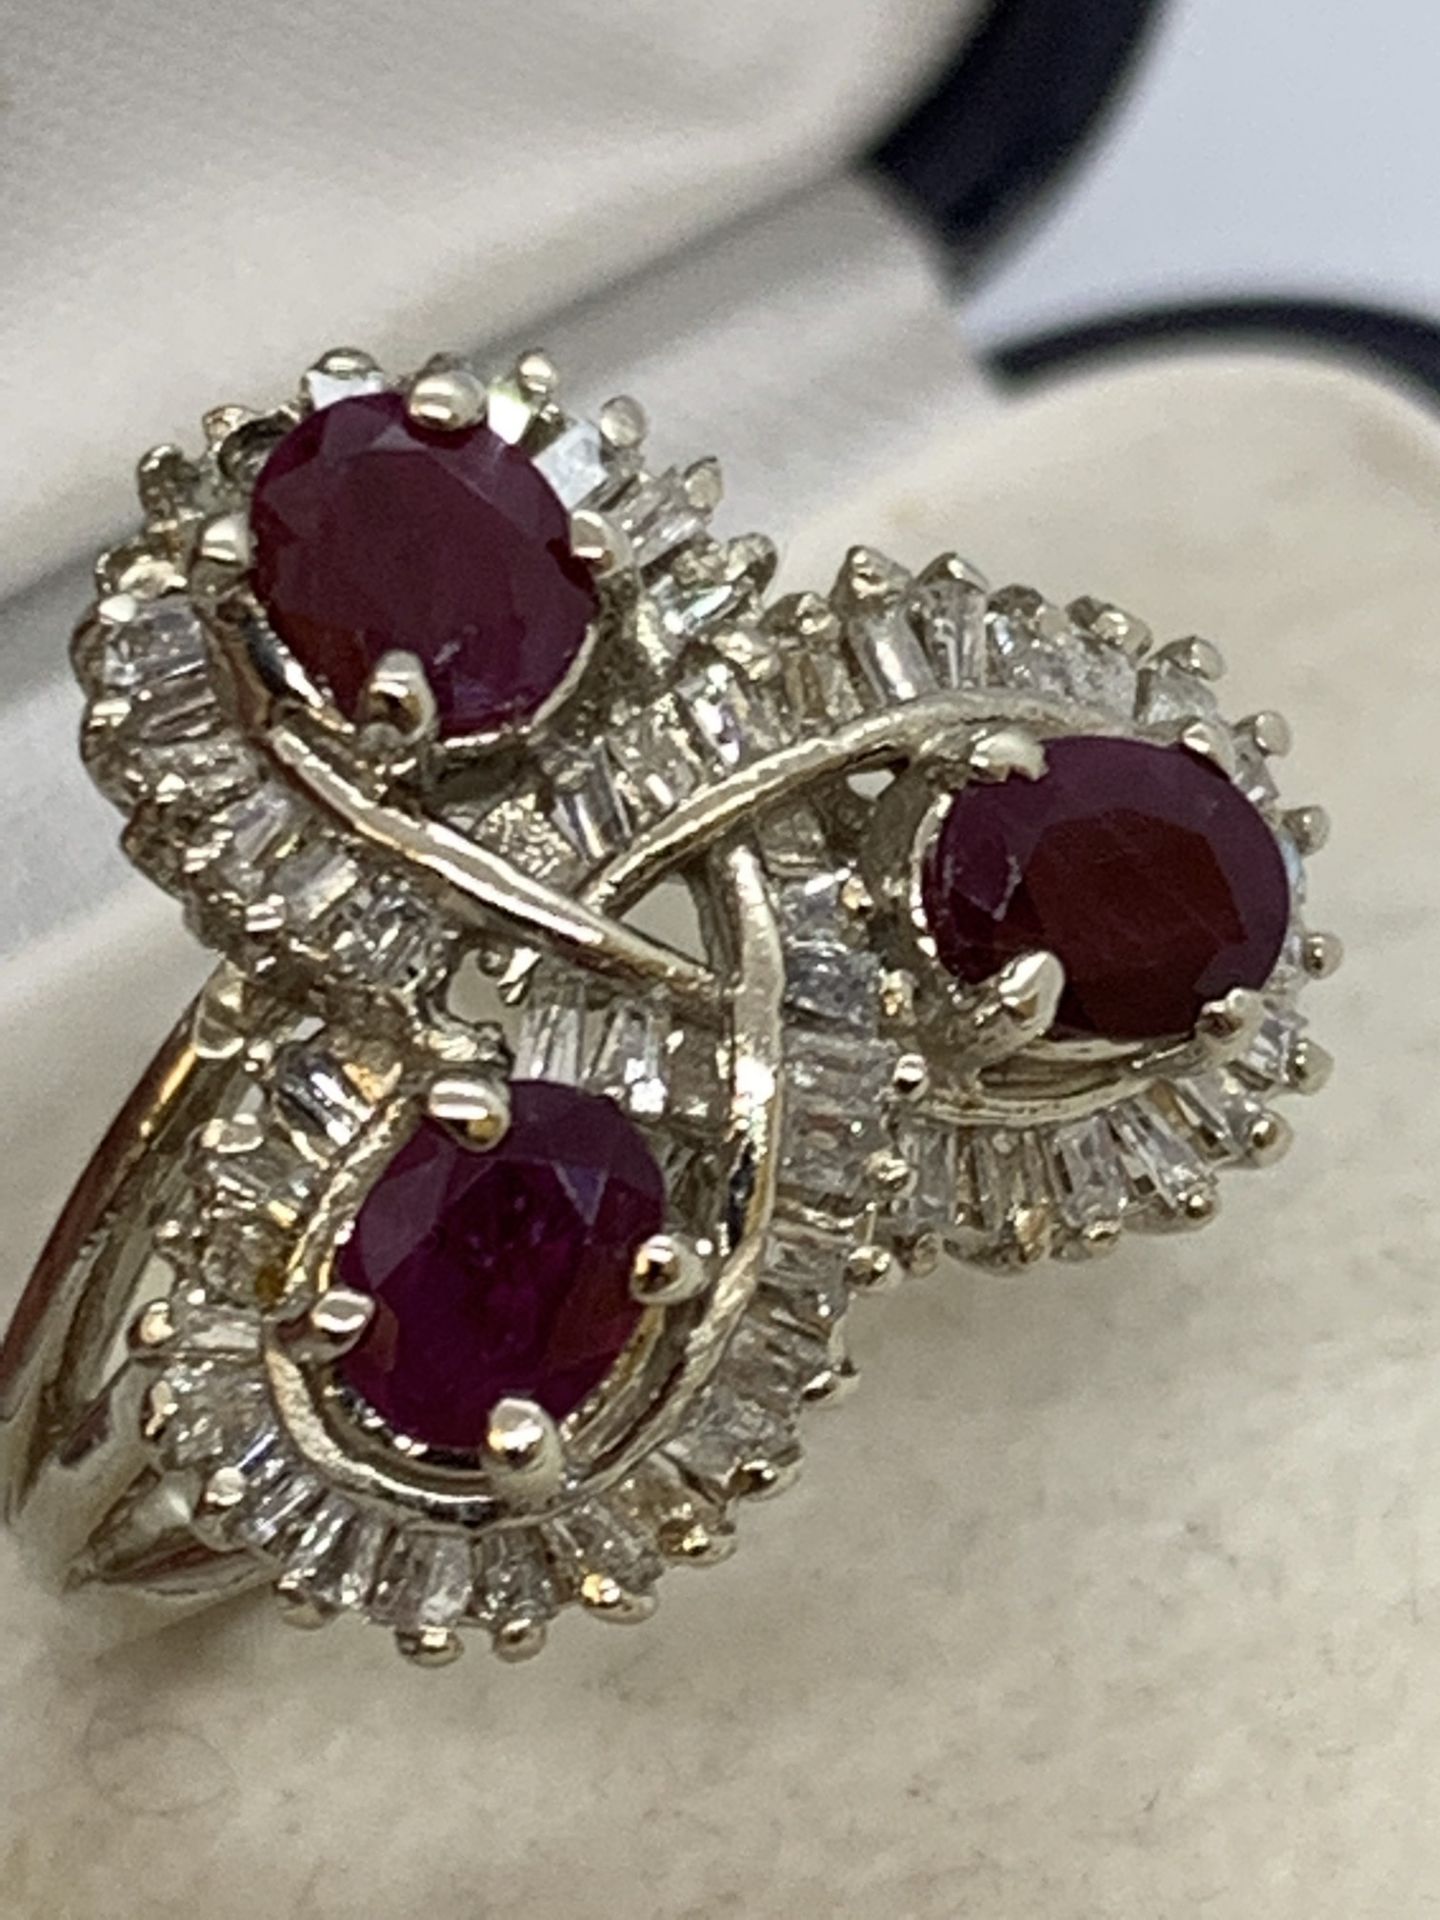 TRIPLE RUBY & DIAMOND SET RING IN 14ct GOLD - 6.8g APPROX - SIZE M APPROX - Image 4 of 8